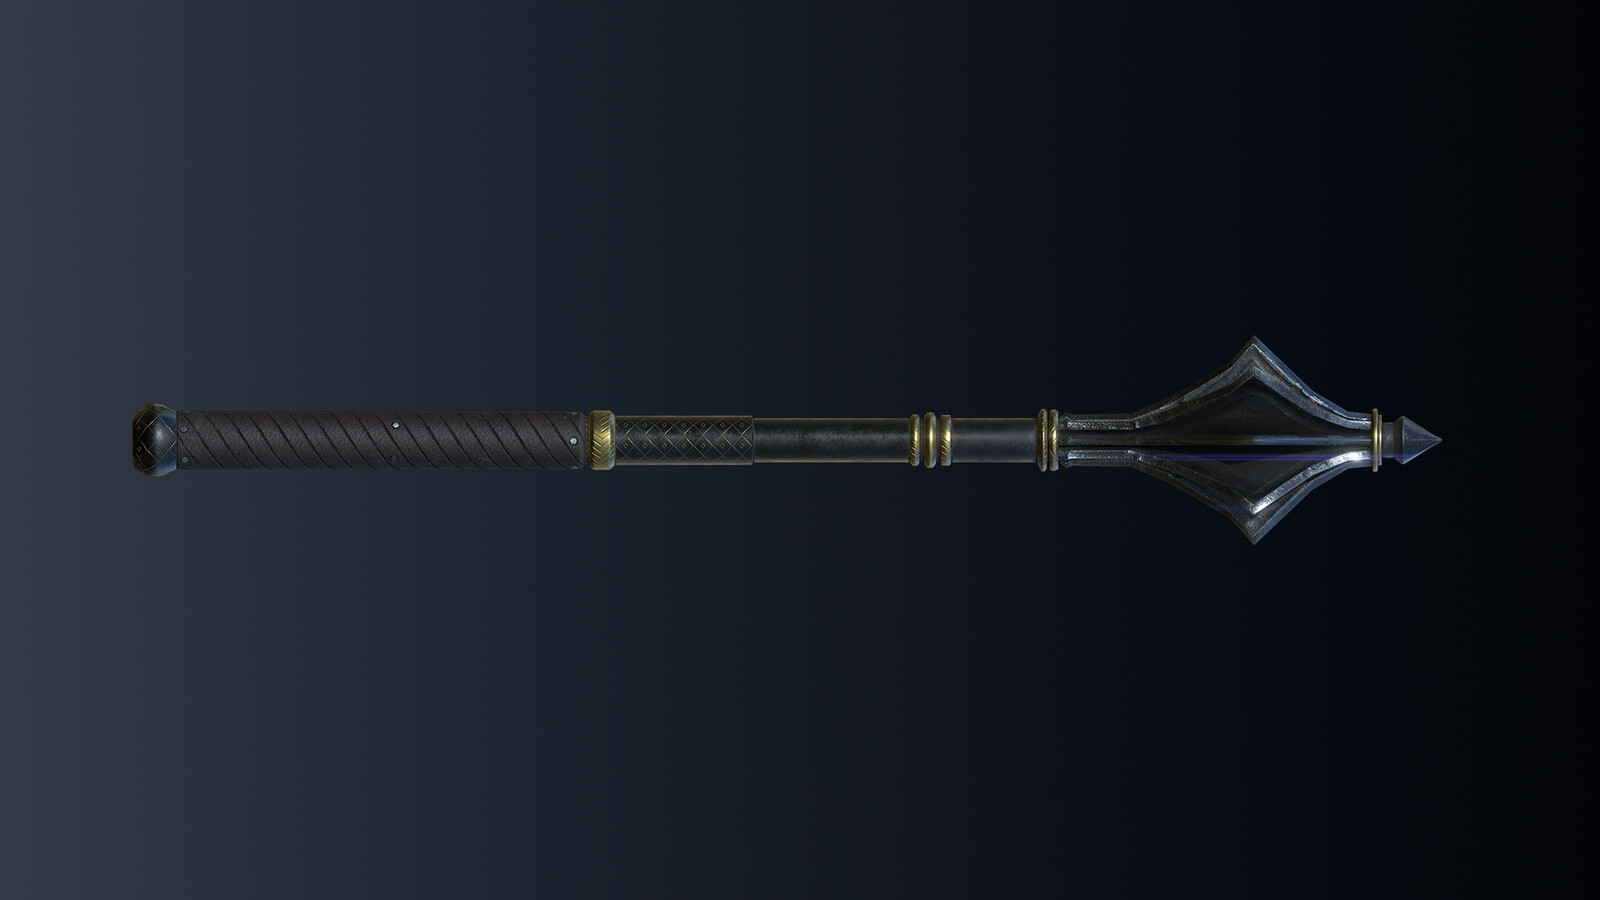 Orthographic render of the mace.